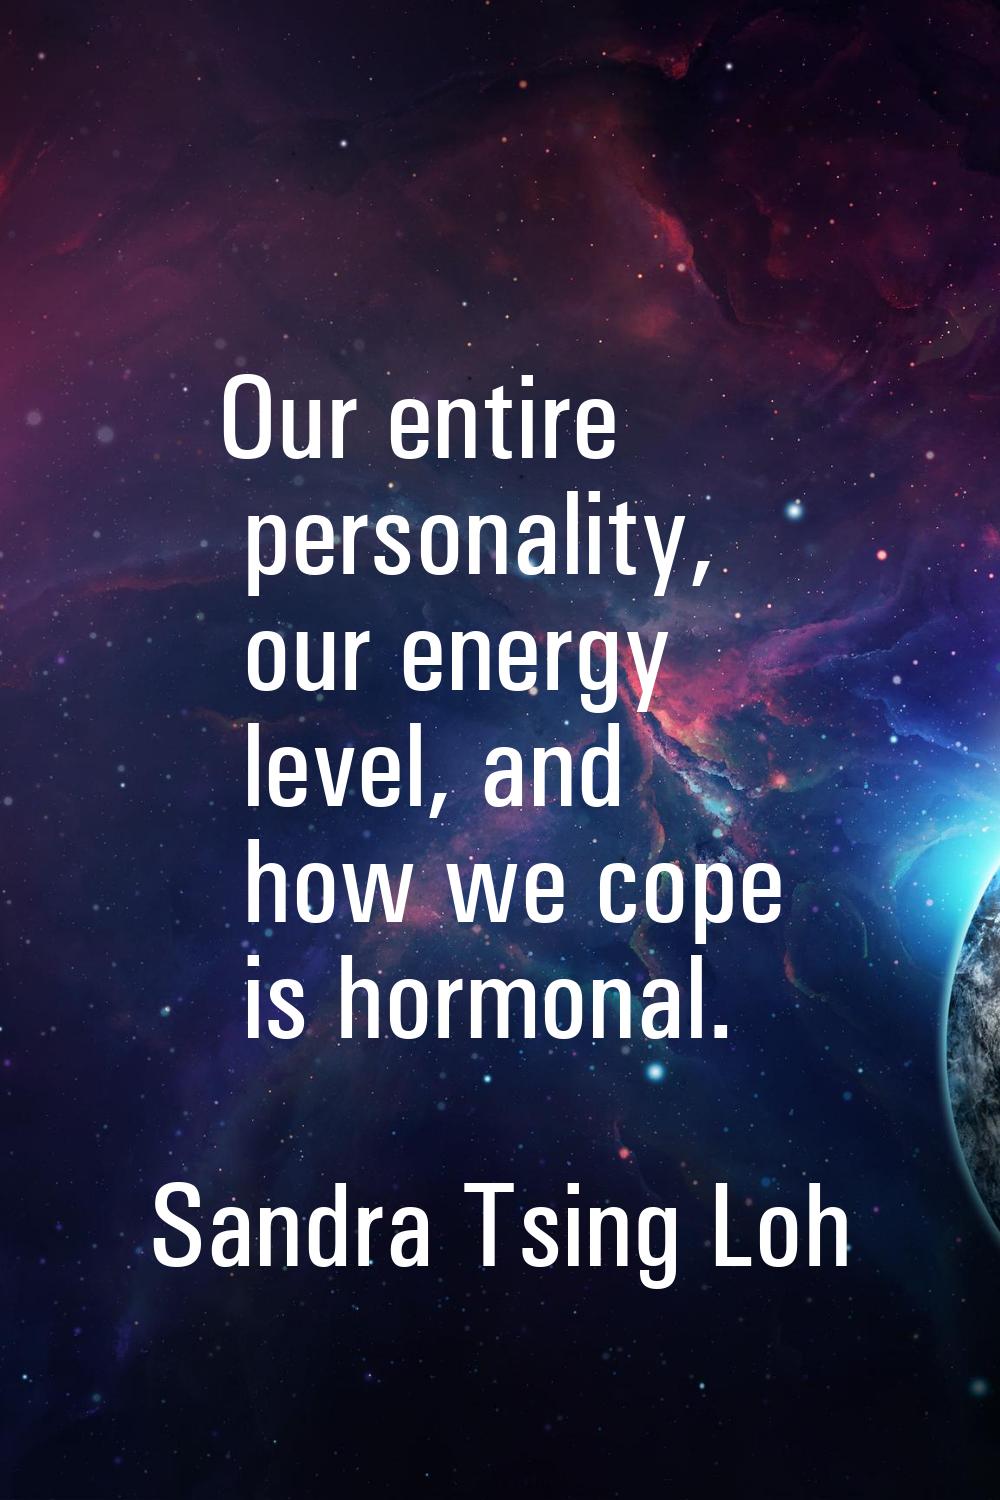 Our entire personality, our energy level, and how we cope is hormonal.